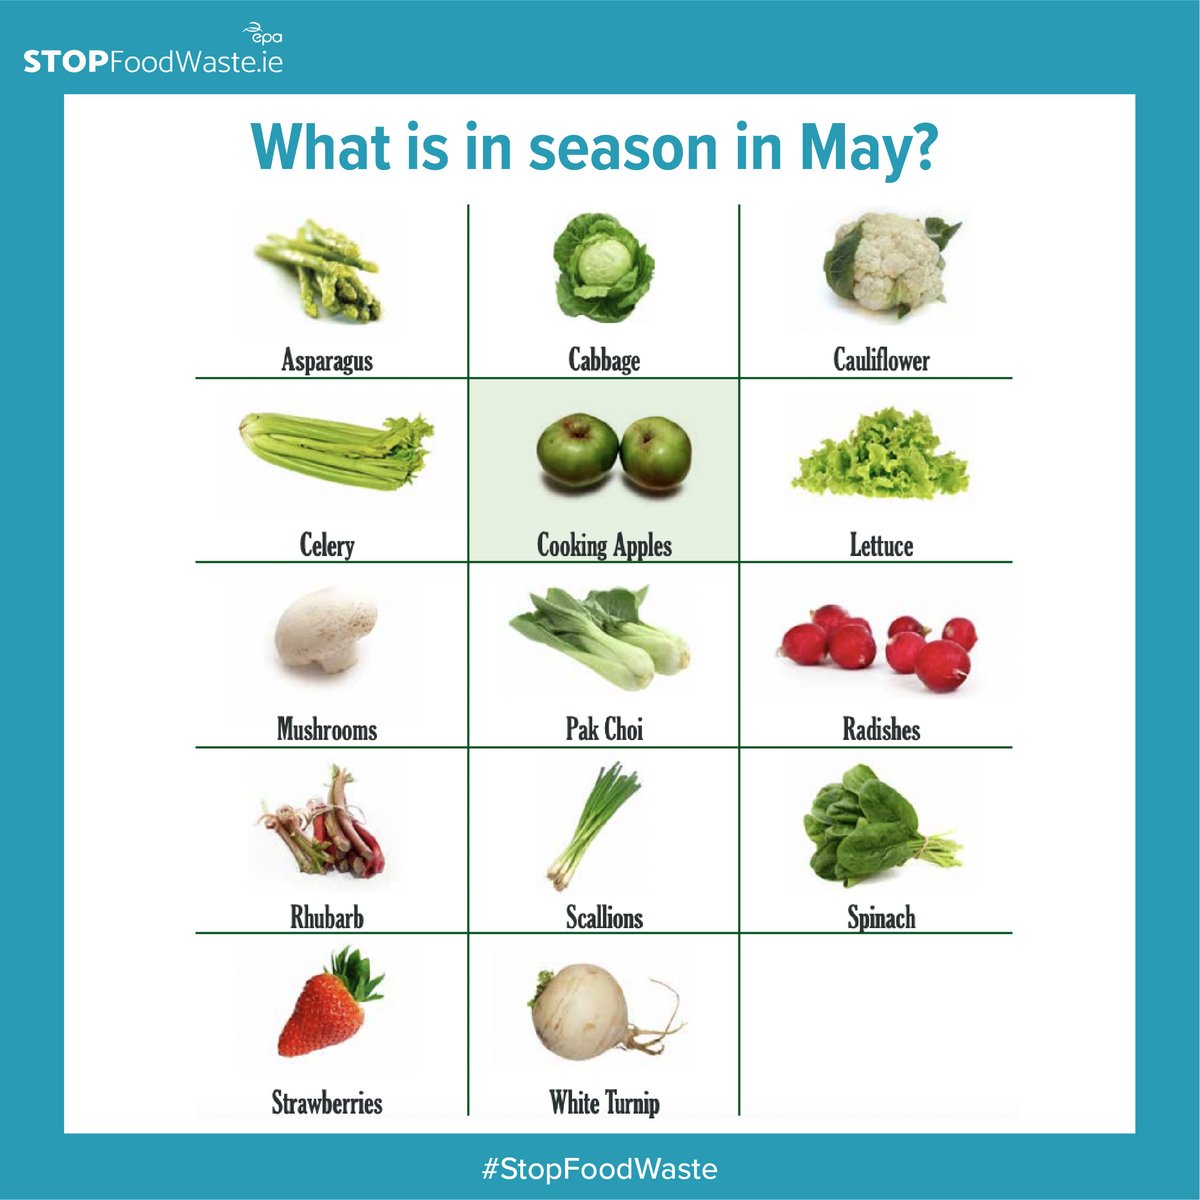 Get better for less!

Save money and get produce that lasts longer by buying locally grown, in-season produce this May. 

Download, save or screengrab our seasonal guide to help #StopFoodWaste this month.